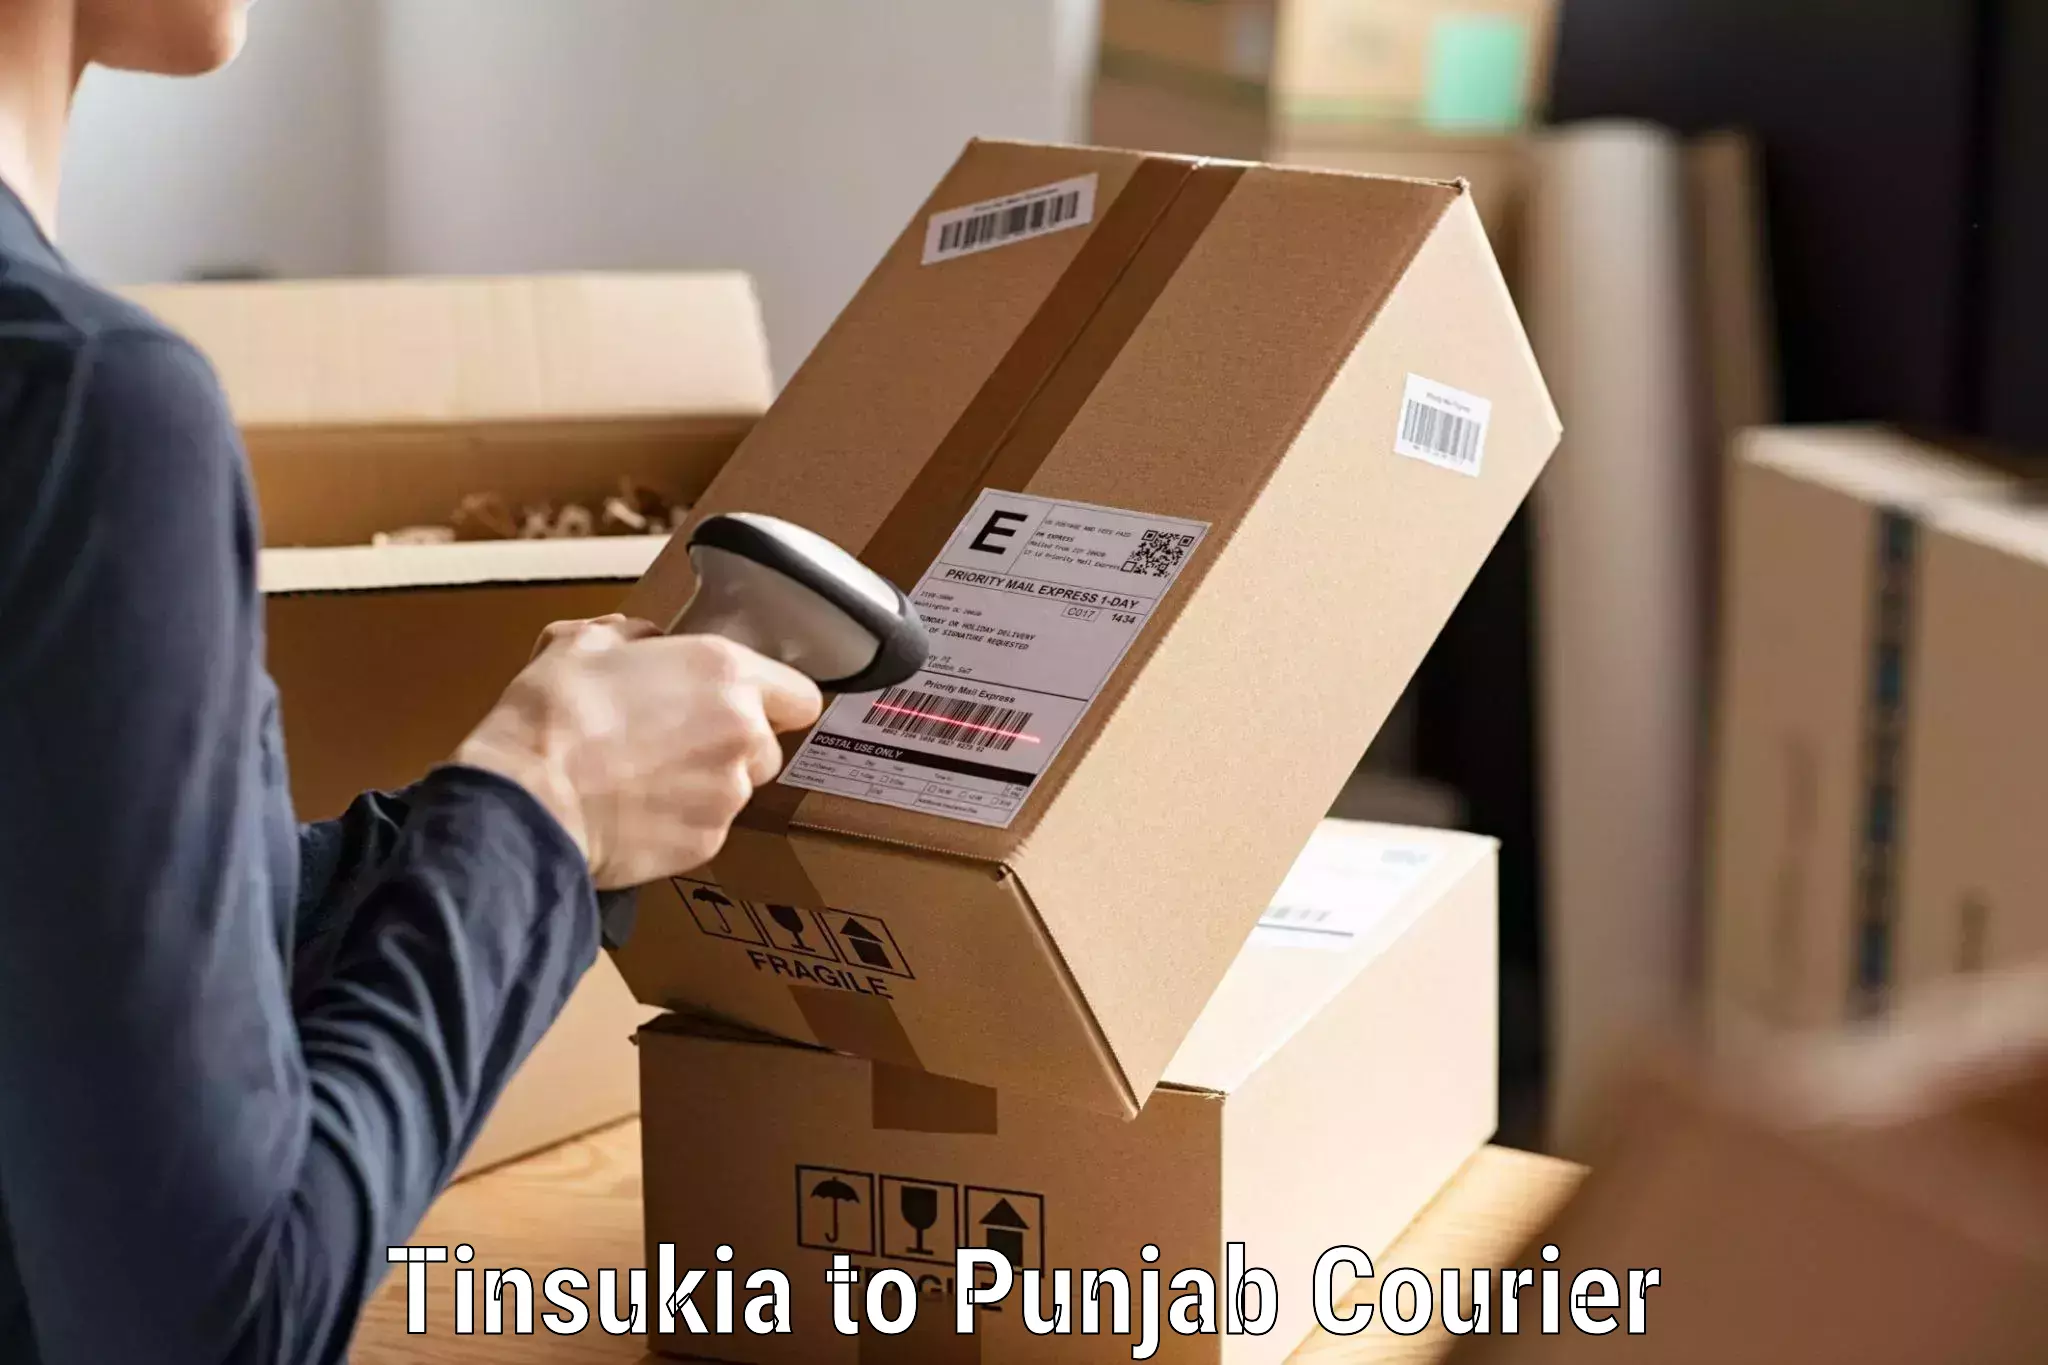 State-of-the-art courier technology Tinsukia to Punjab